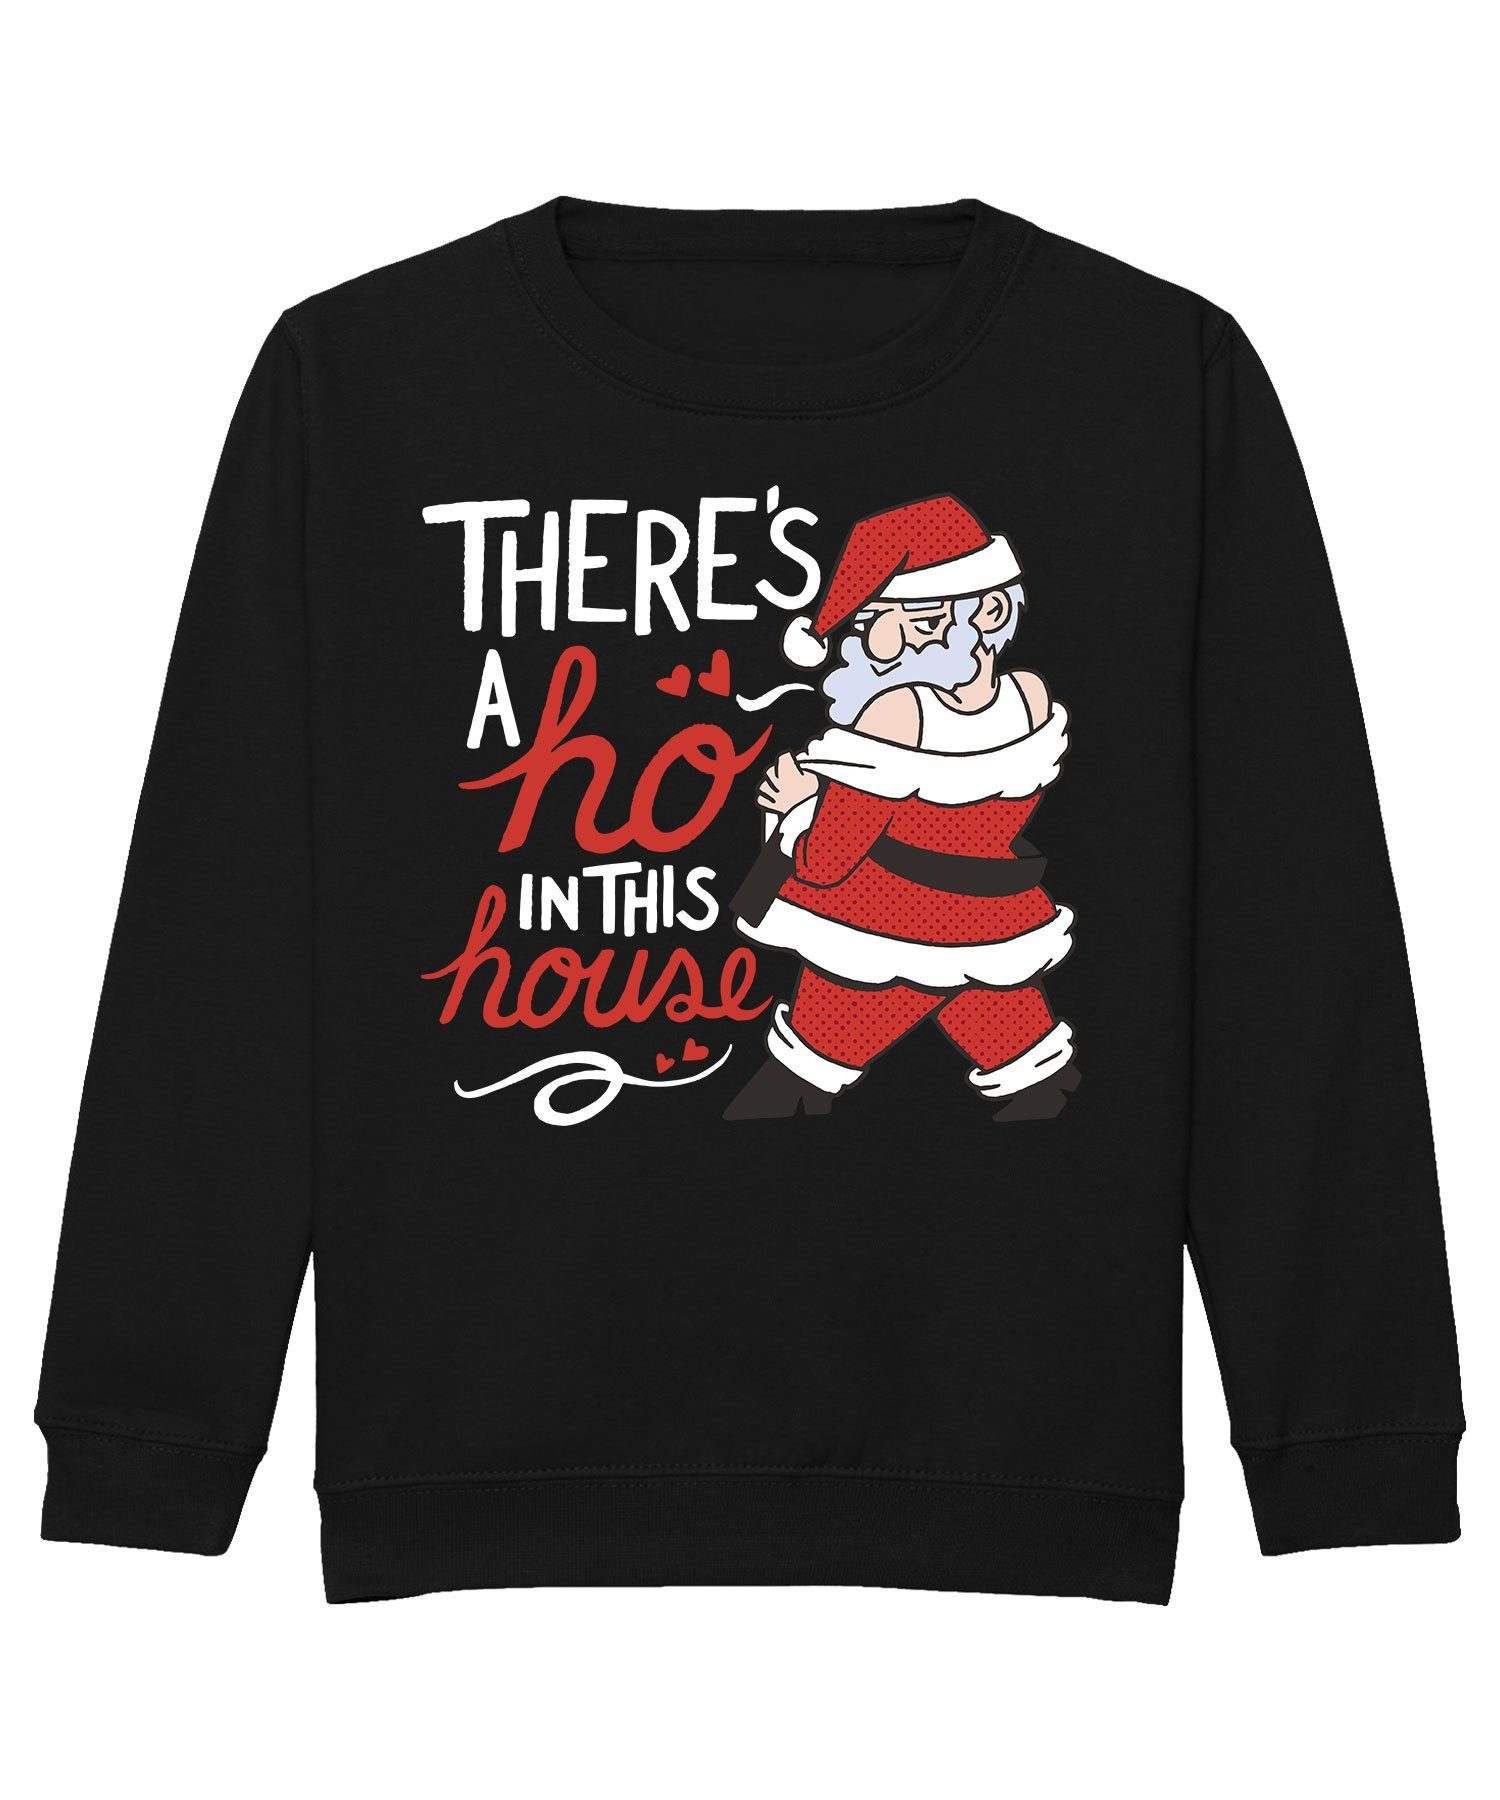 Quattro Formatee Sweatshirt There's a Ho in this house lustig Weihnachtsmann Kinder Pullover Sweat (1-tlg)